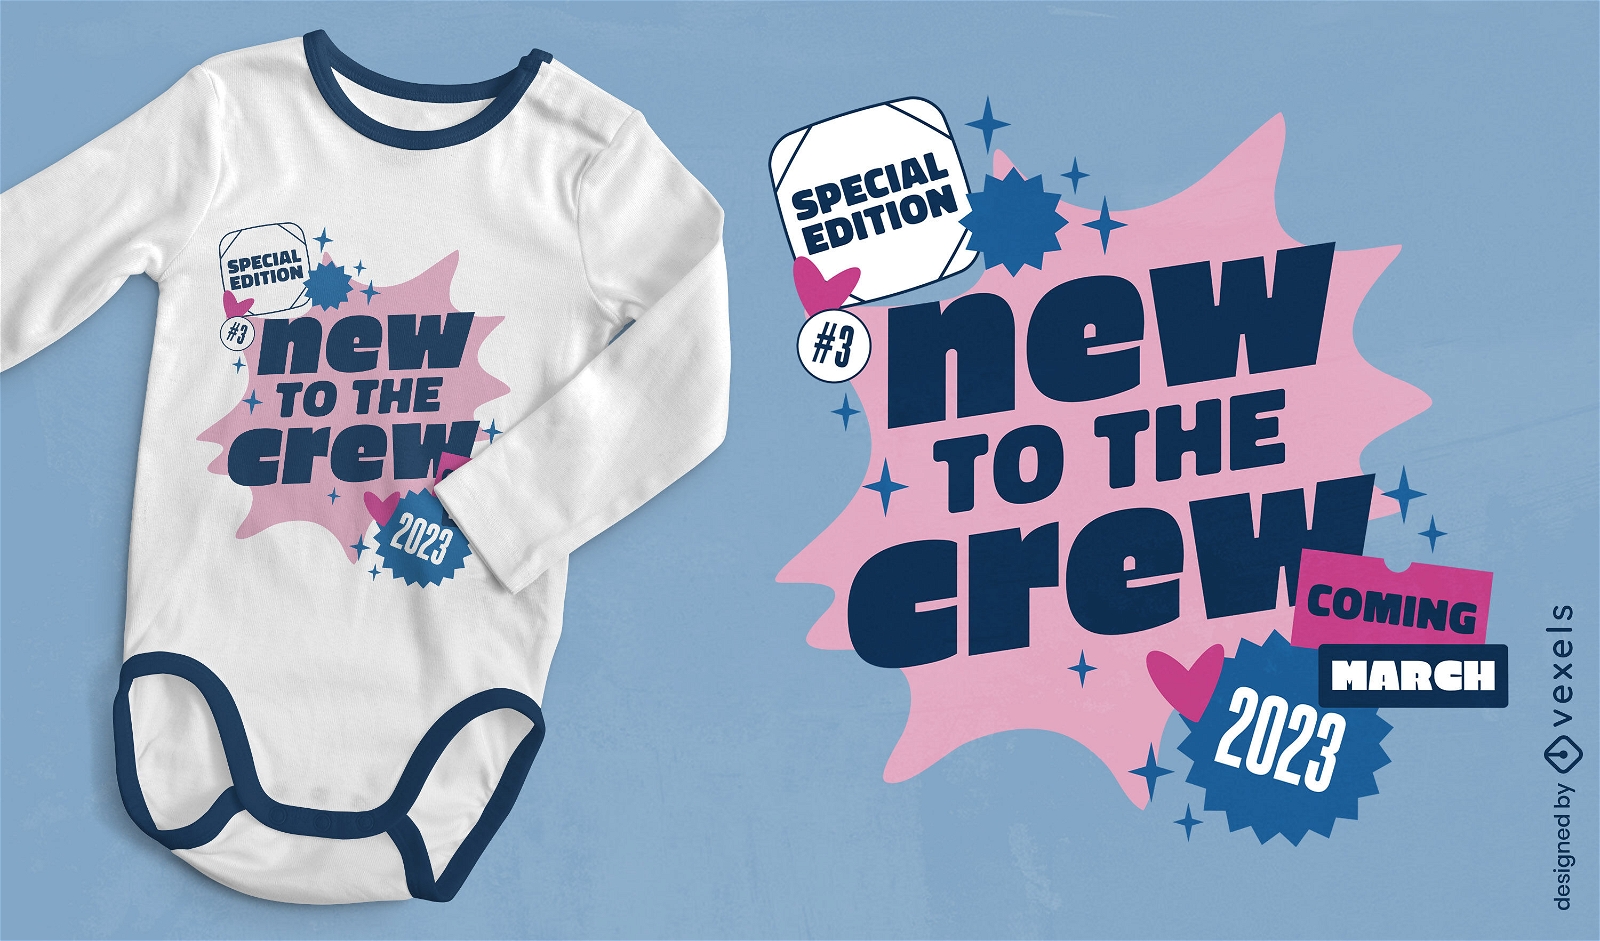 New to the crew baby announcement t-shirt design